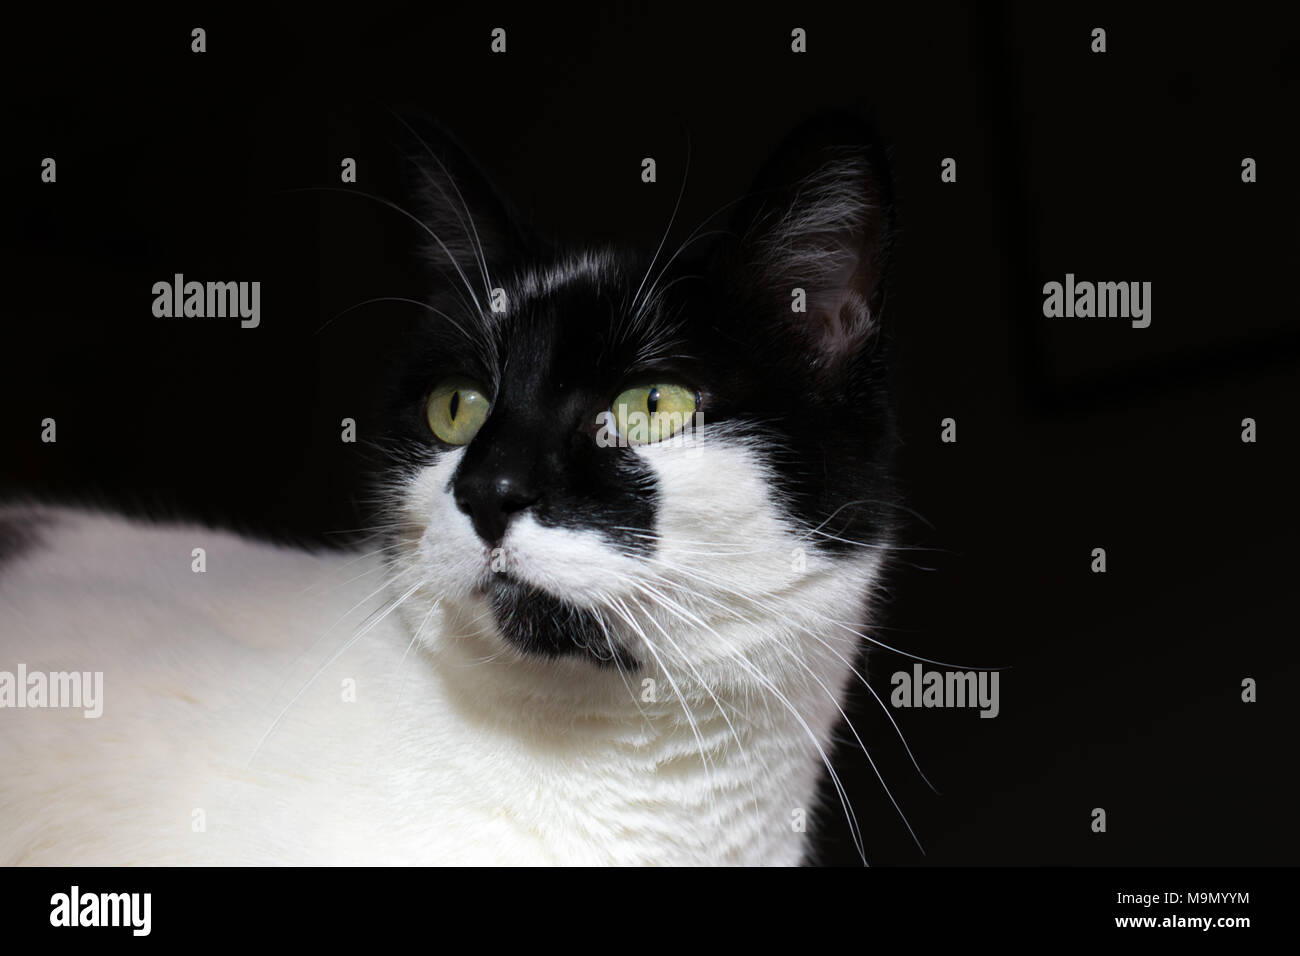 Black and white cat with green eyes looking into the distance with plain black background Stock Photo